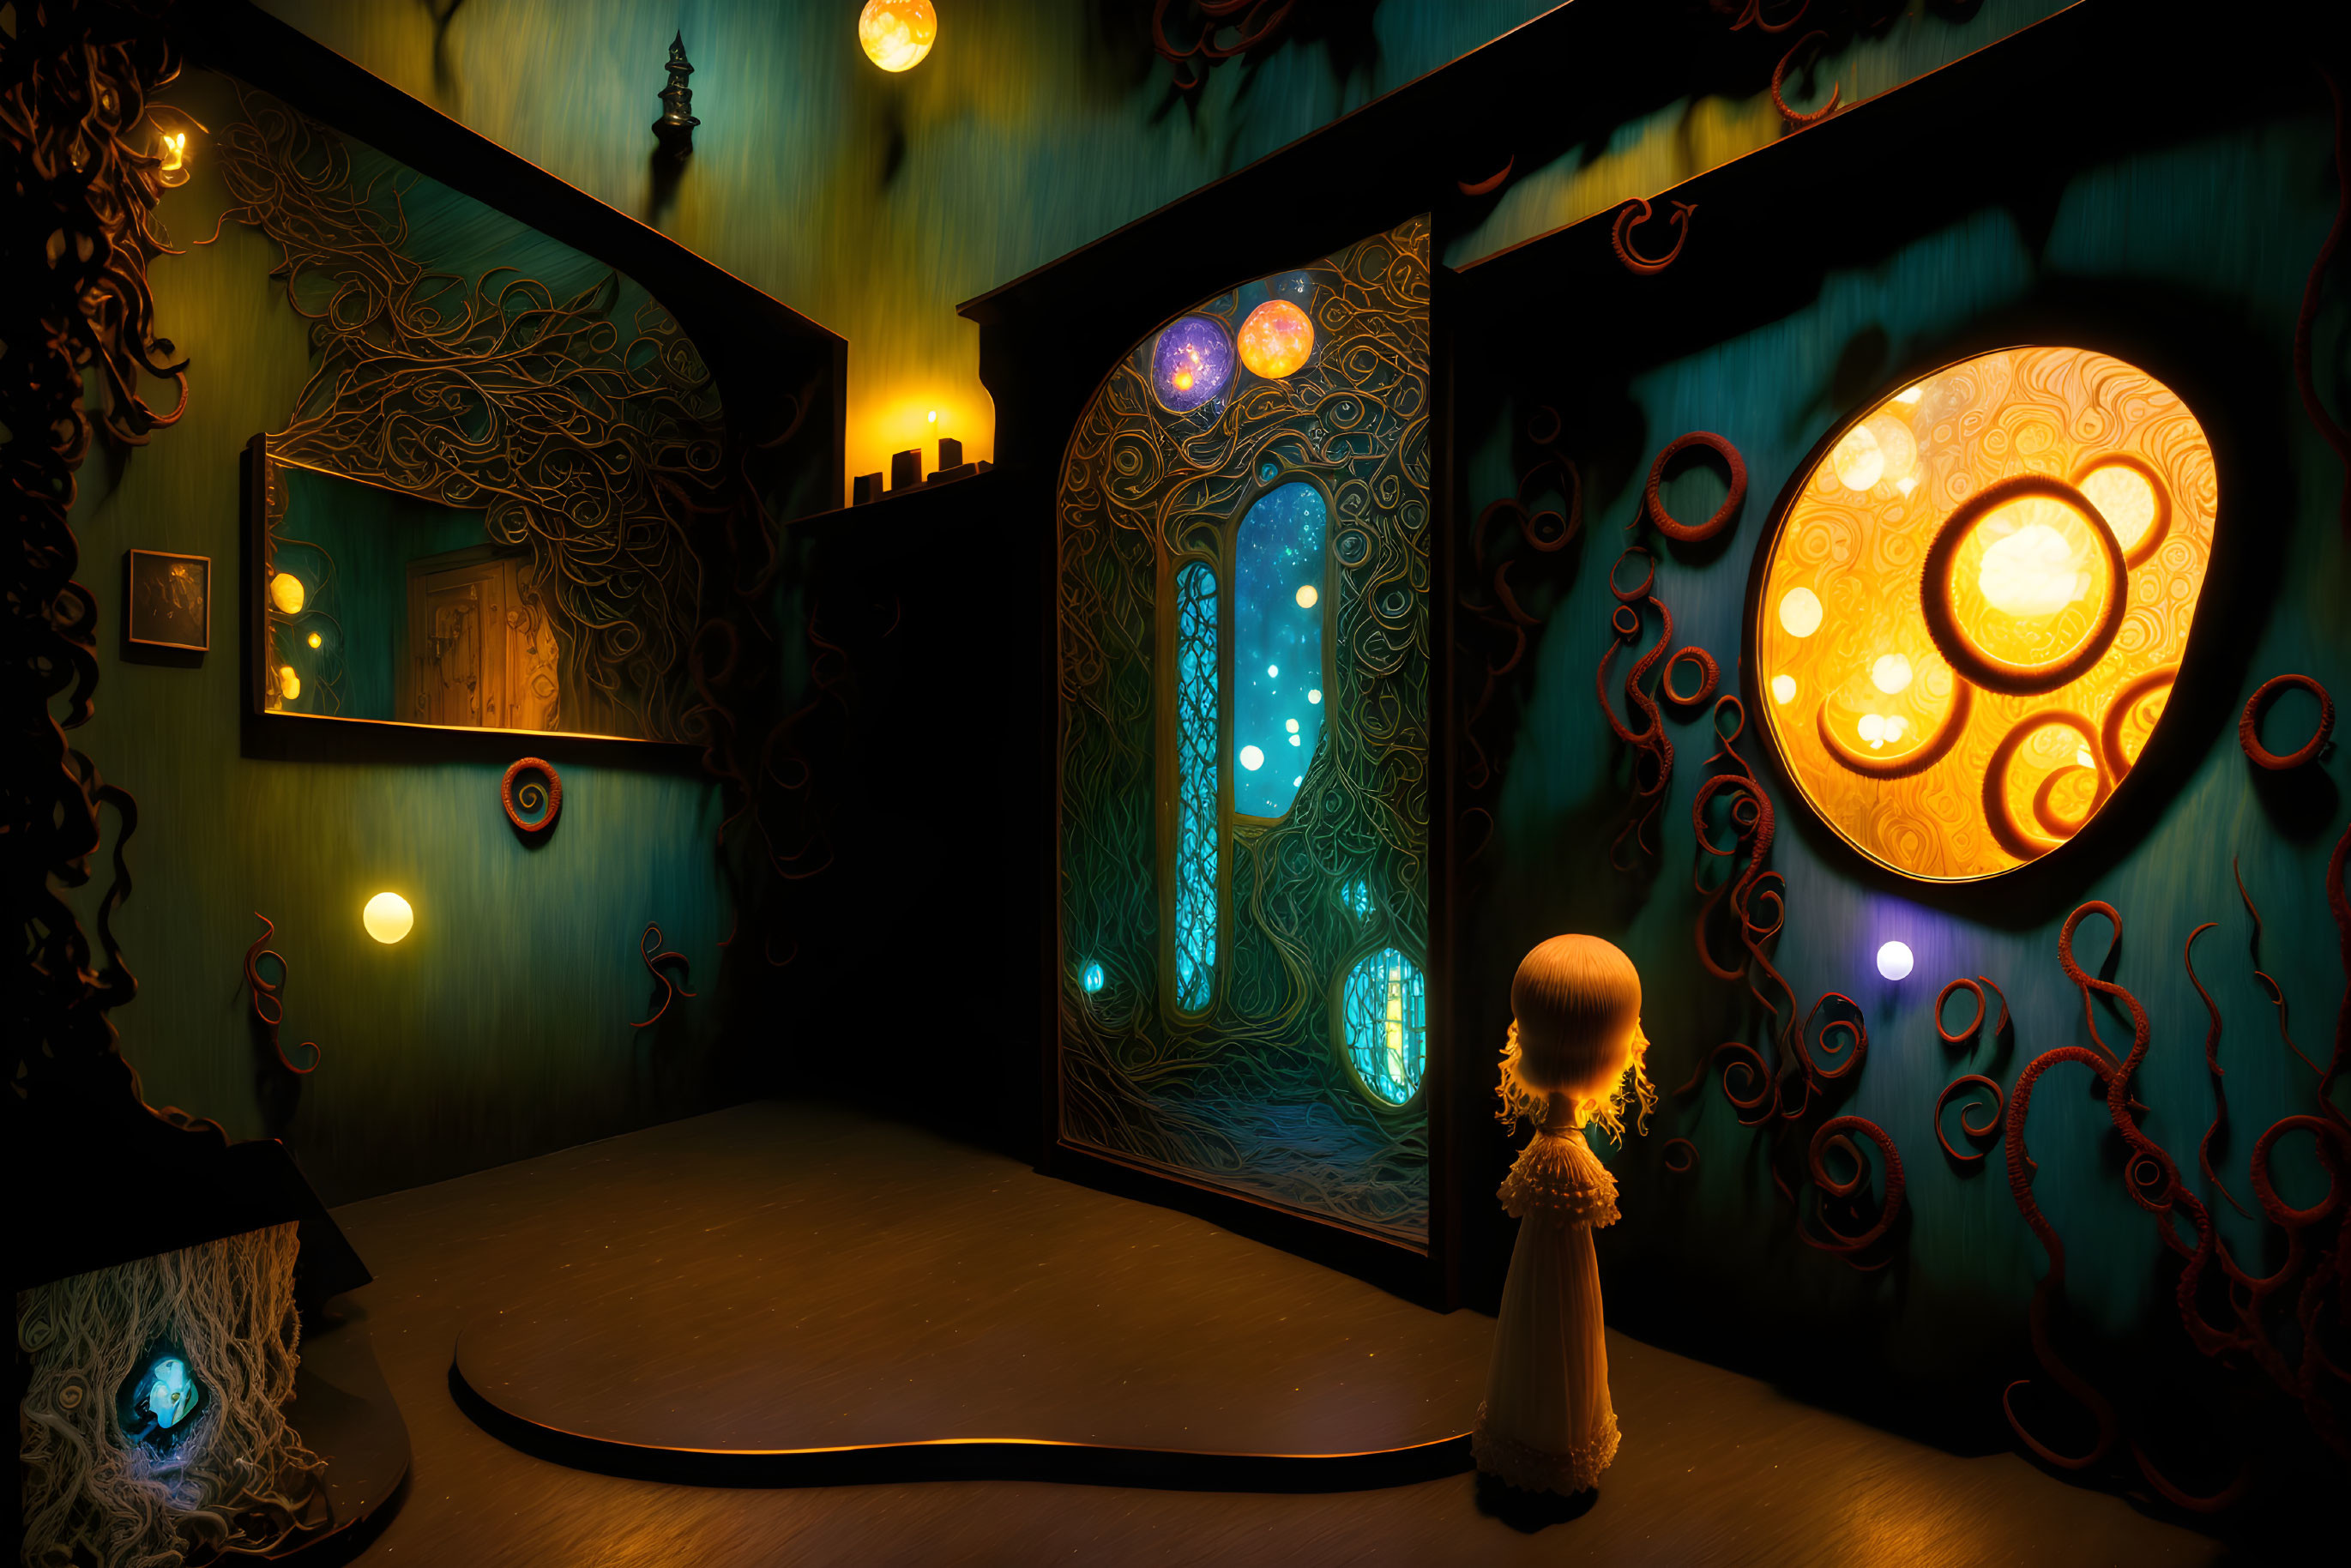 Child in white dress in mystical room with glowing orbs, intricate patterns, mirrors, and illuminated doorway